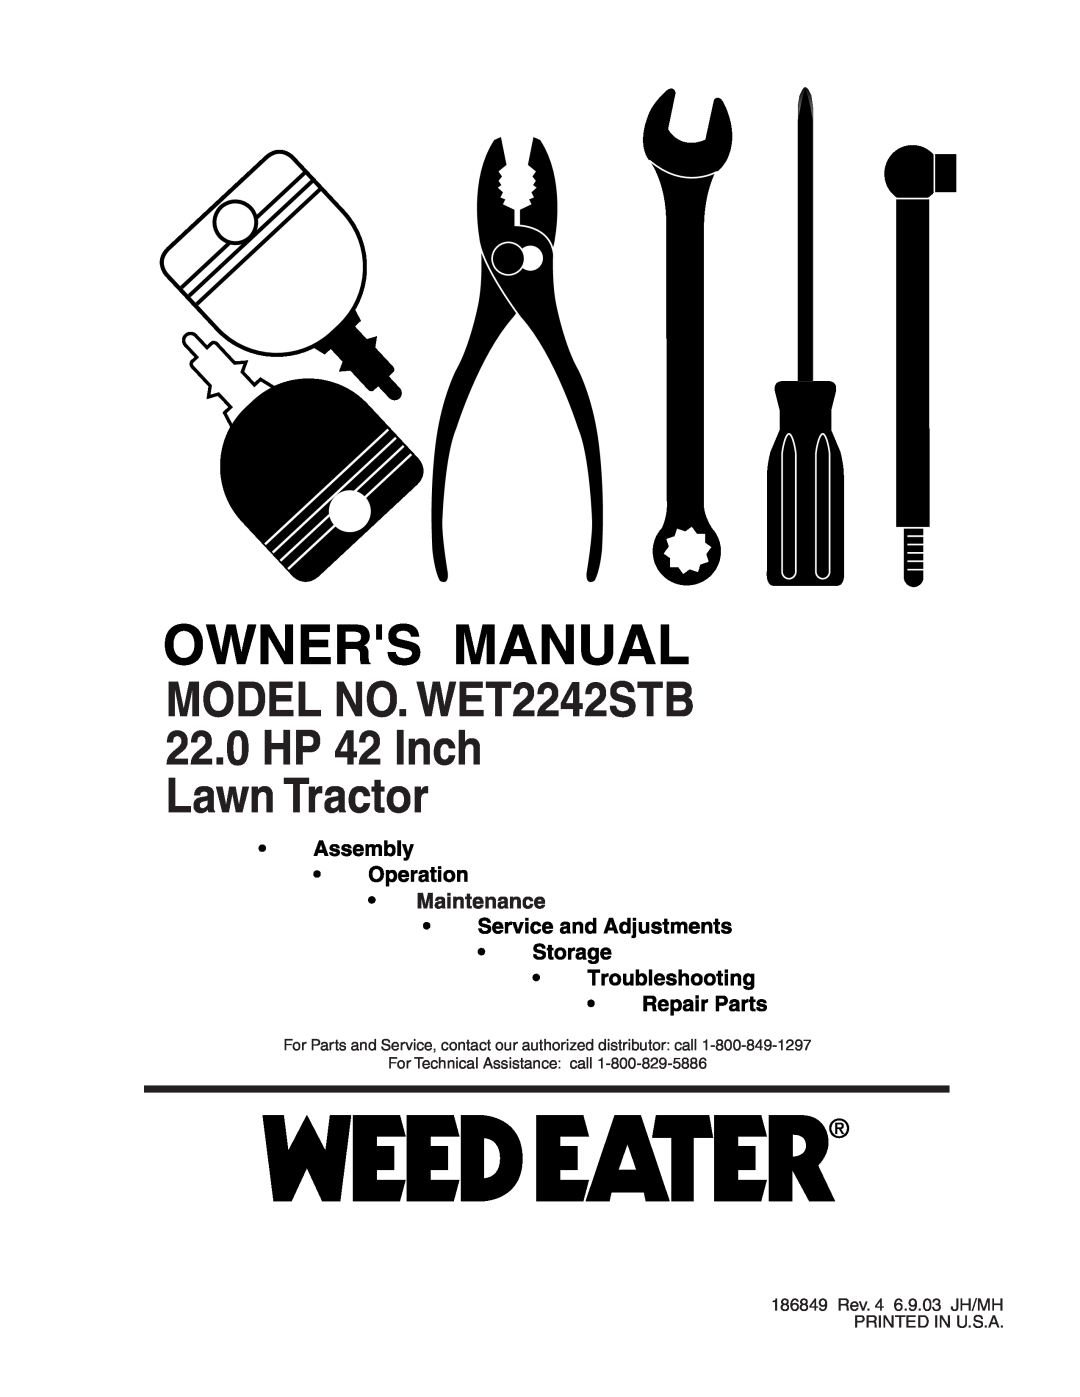 Weed Eater manual MODEL NO. WET2242STB 22.0HP 42 Inch Lawn Tractor 